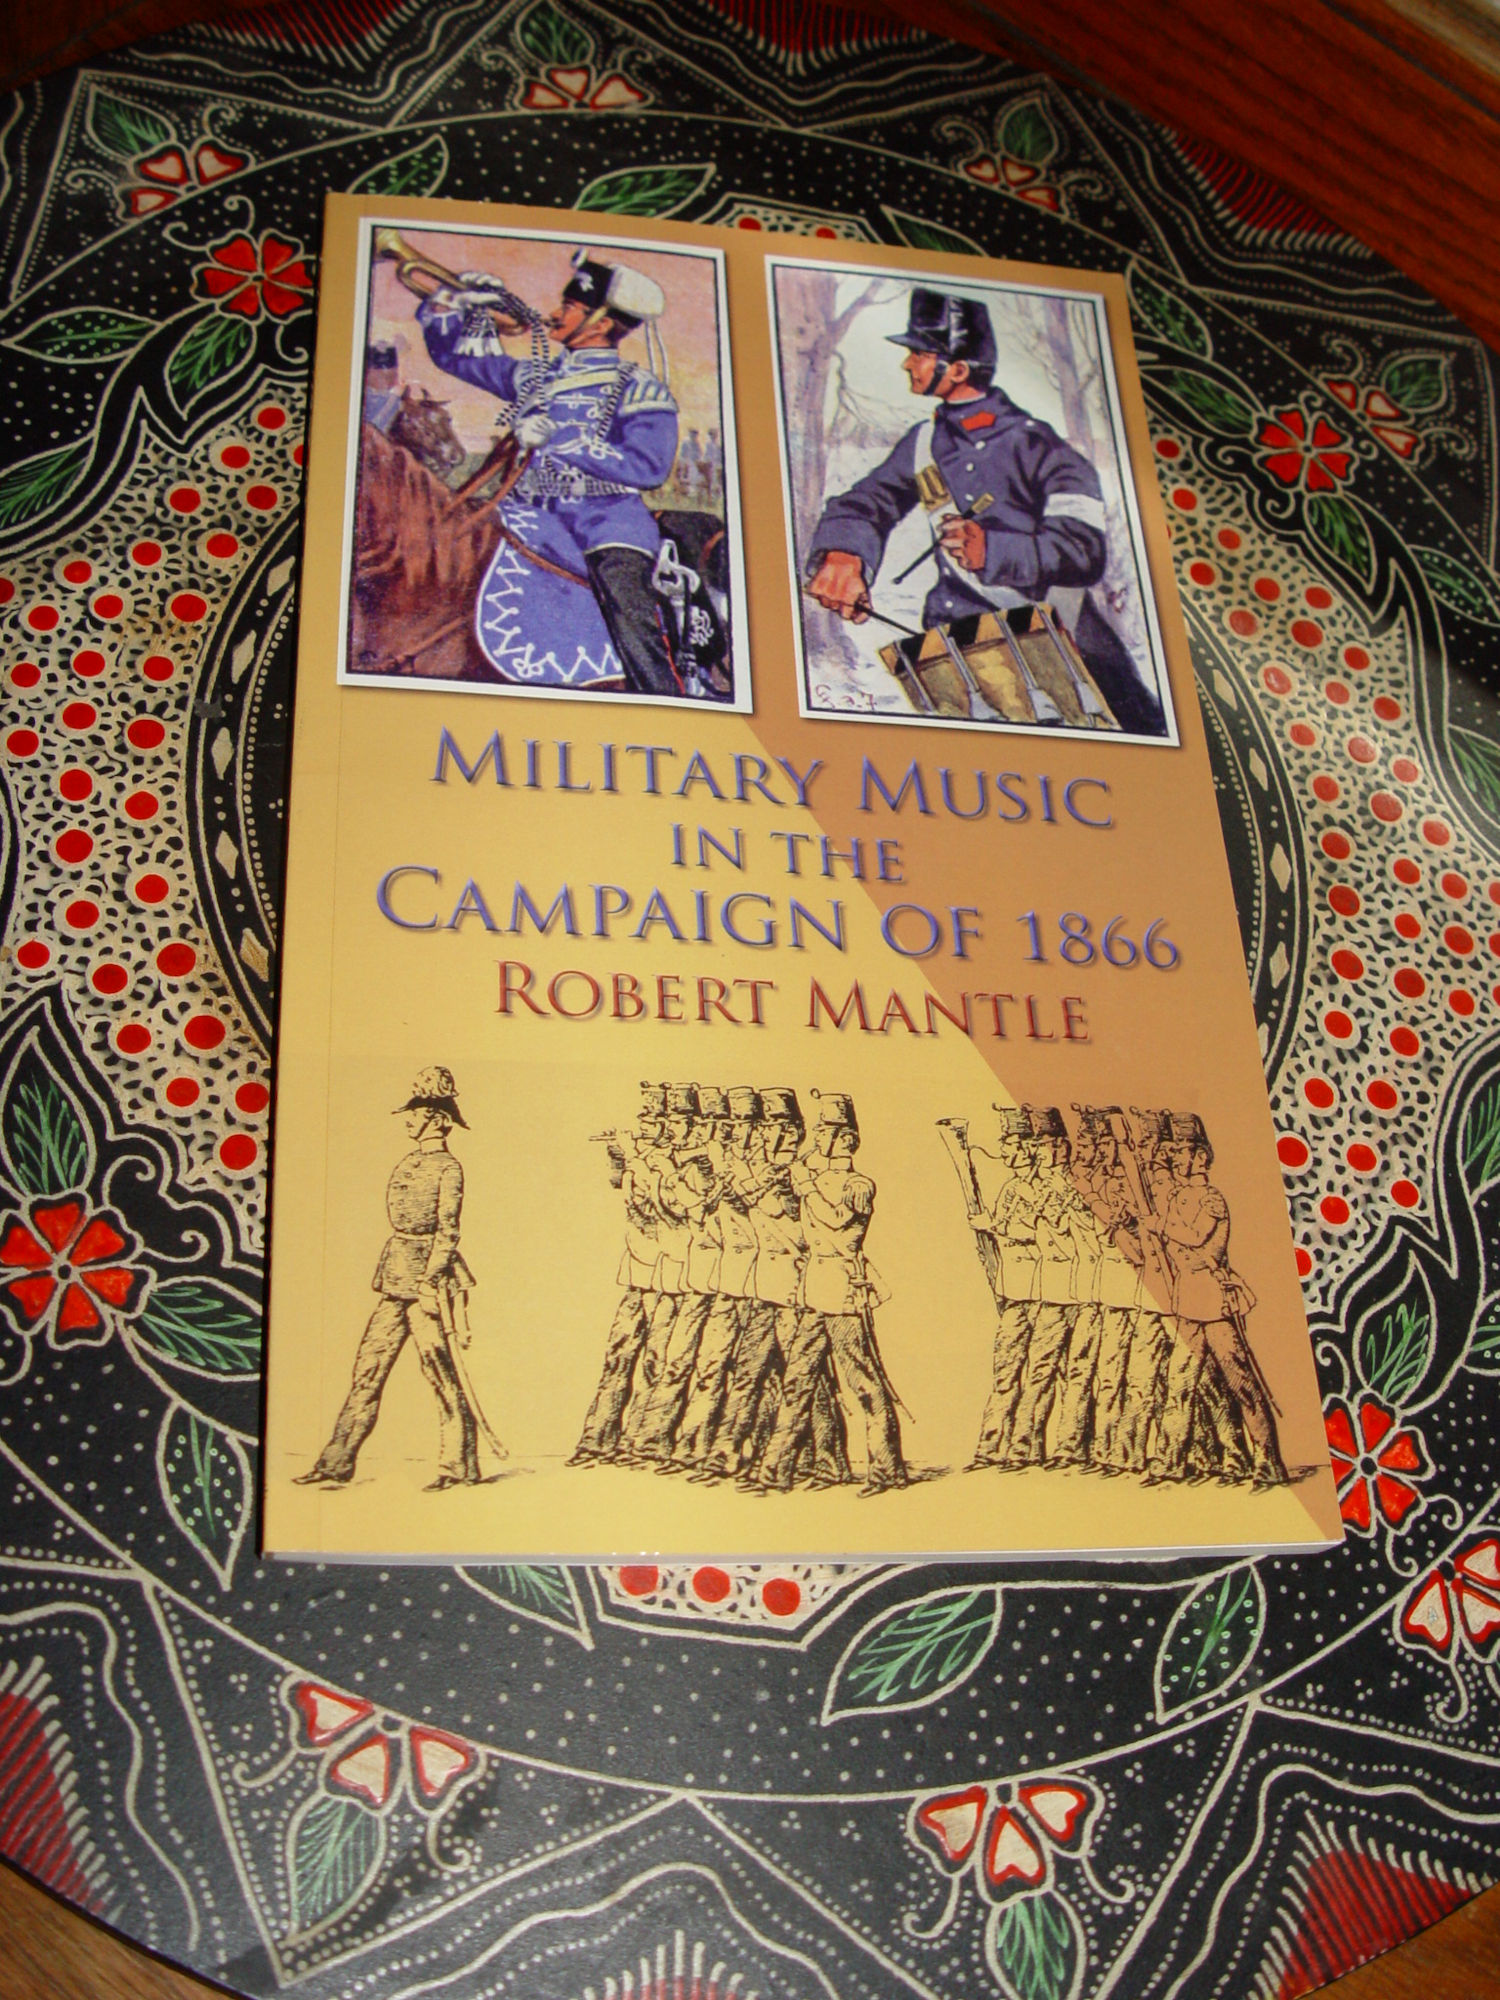 2007 Military Music in the Campaign of 1866
                        by Robert Mantle